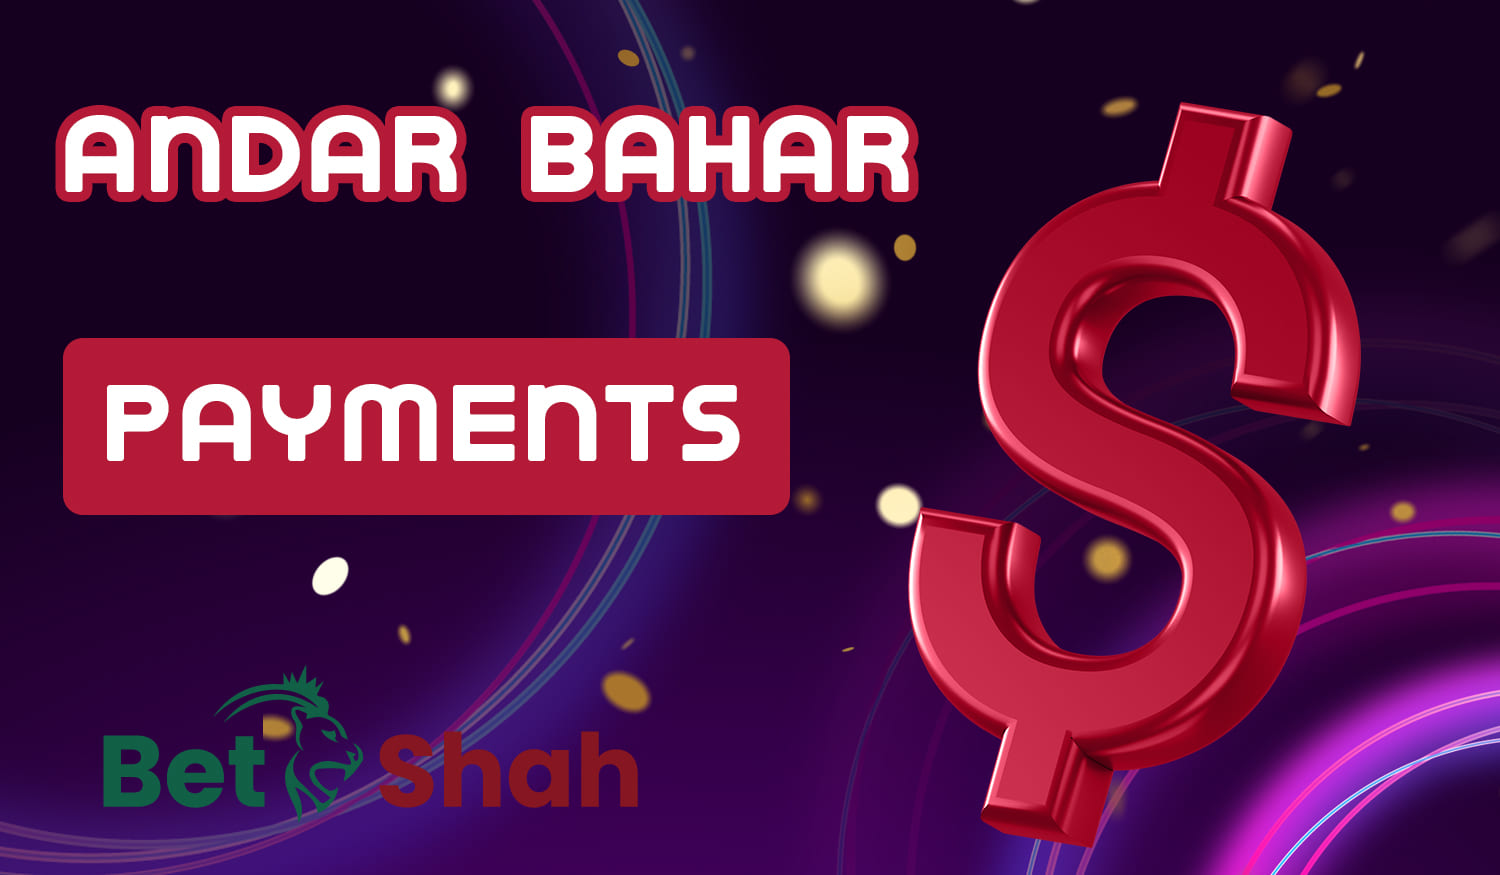 How to deposit and withdraw funds from BetShah online casino site